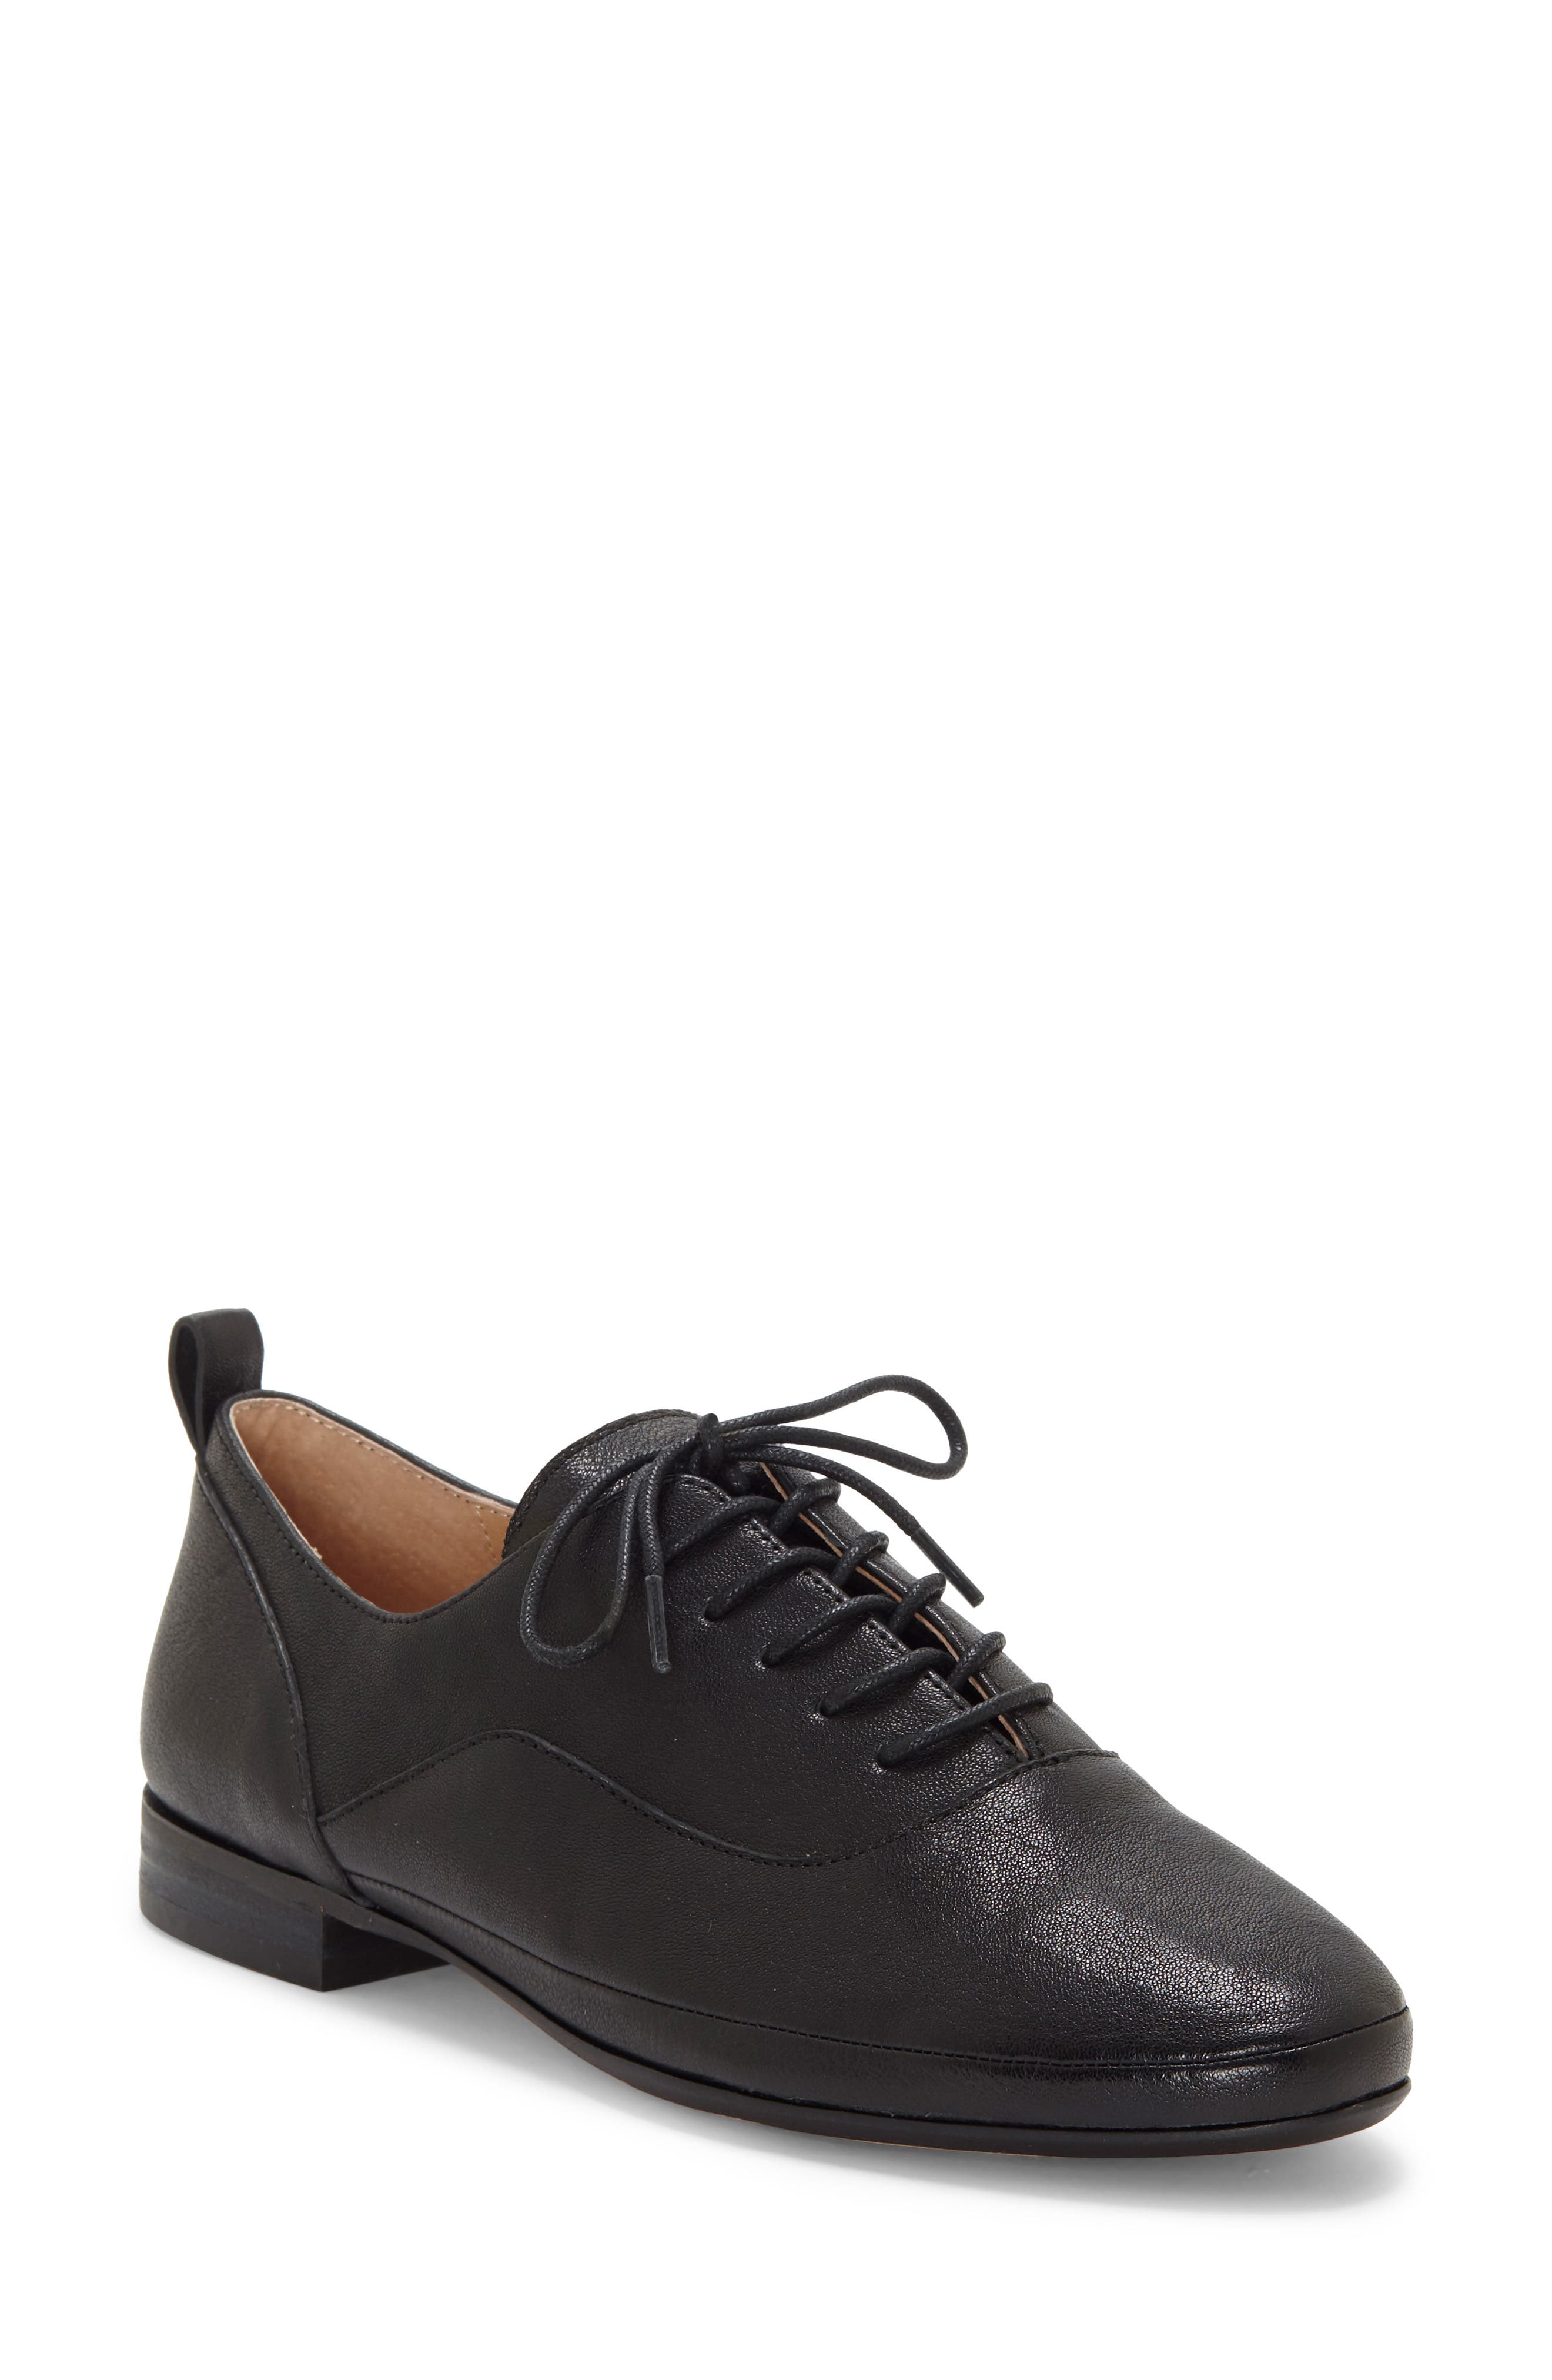 Oxfords Comfortable Shoes | Nordstrom